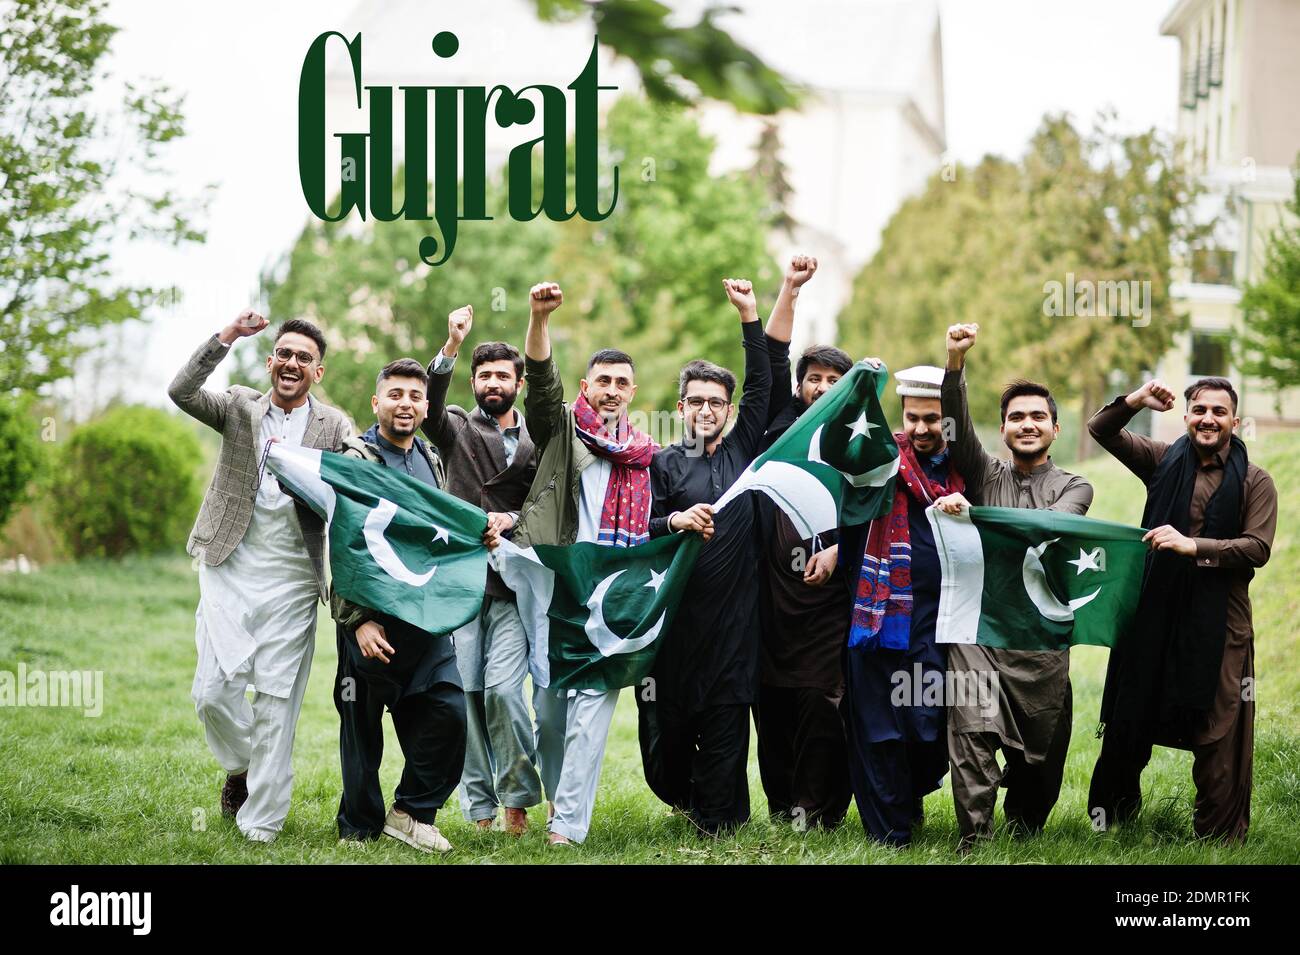 Gujrat city. Group of pakistani man wearing traditional clothes with national flags. Biggest cities of Pakistan concept. Stock Photo